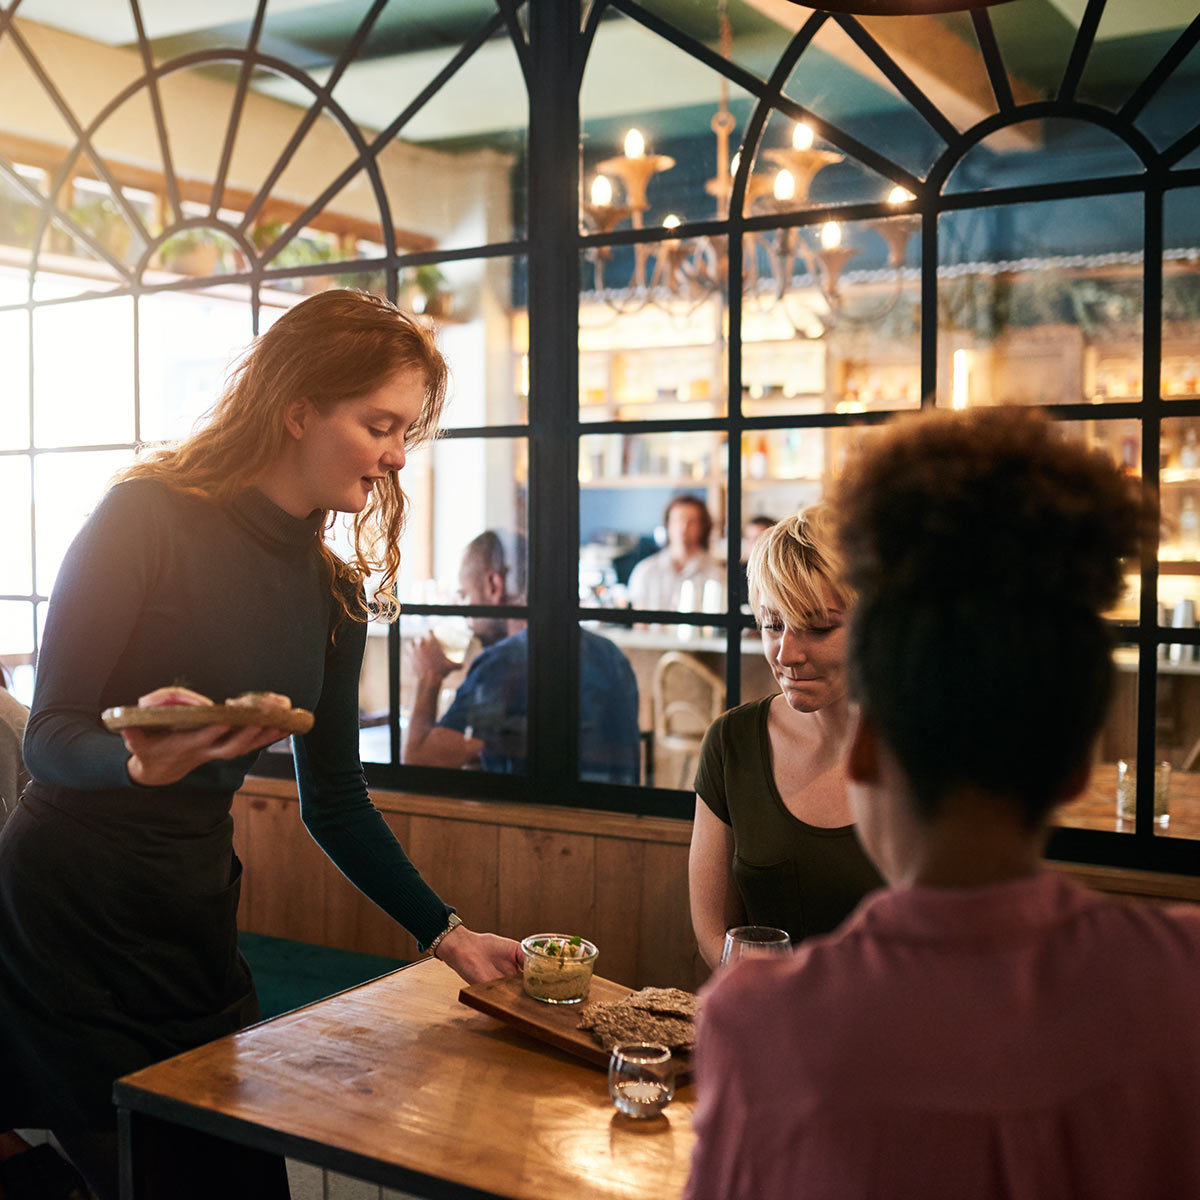 Restaurants are finding that mobile marketing is the sure fire way to get those tables filled